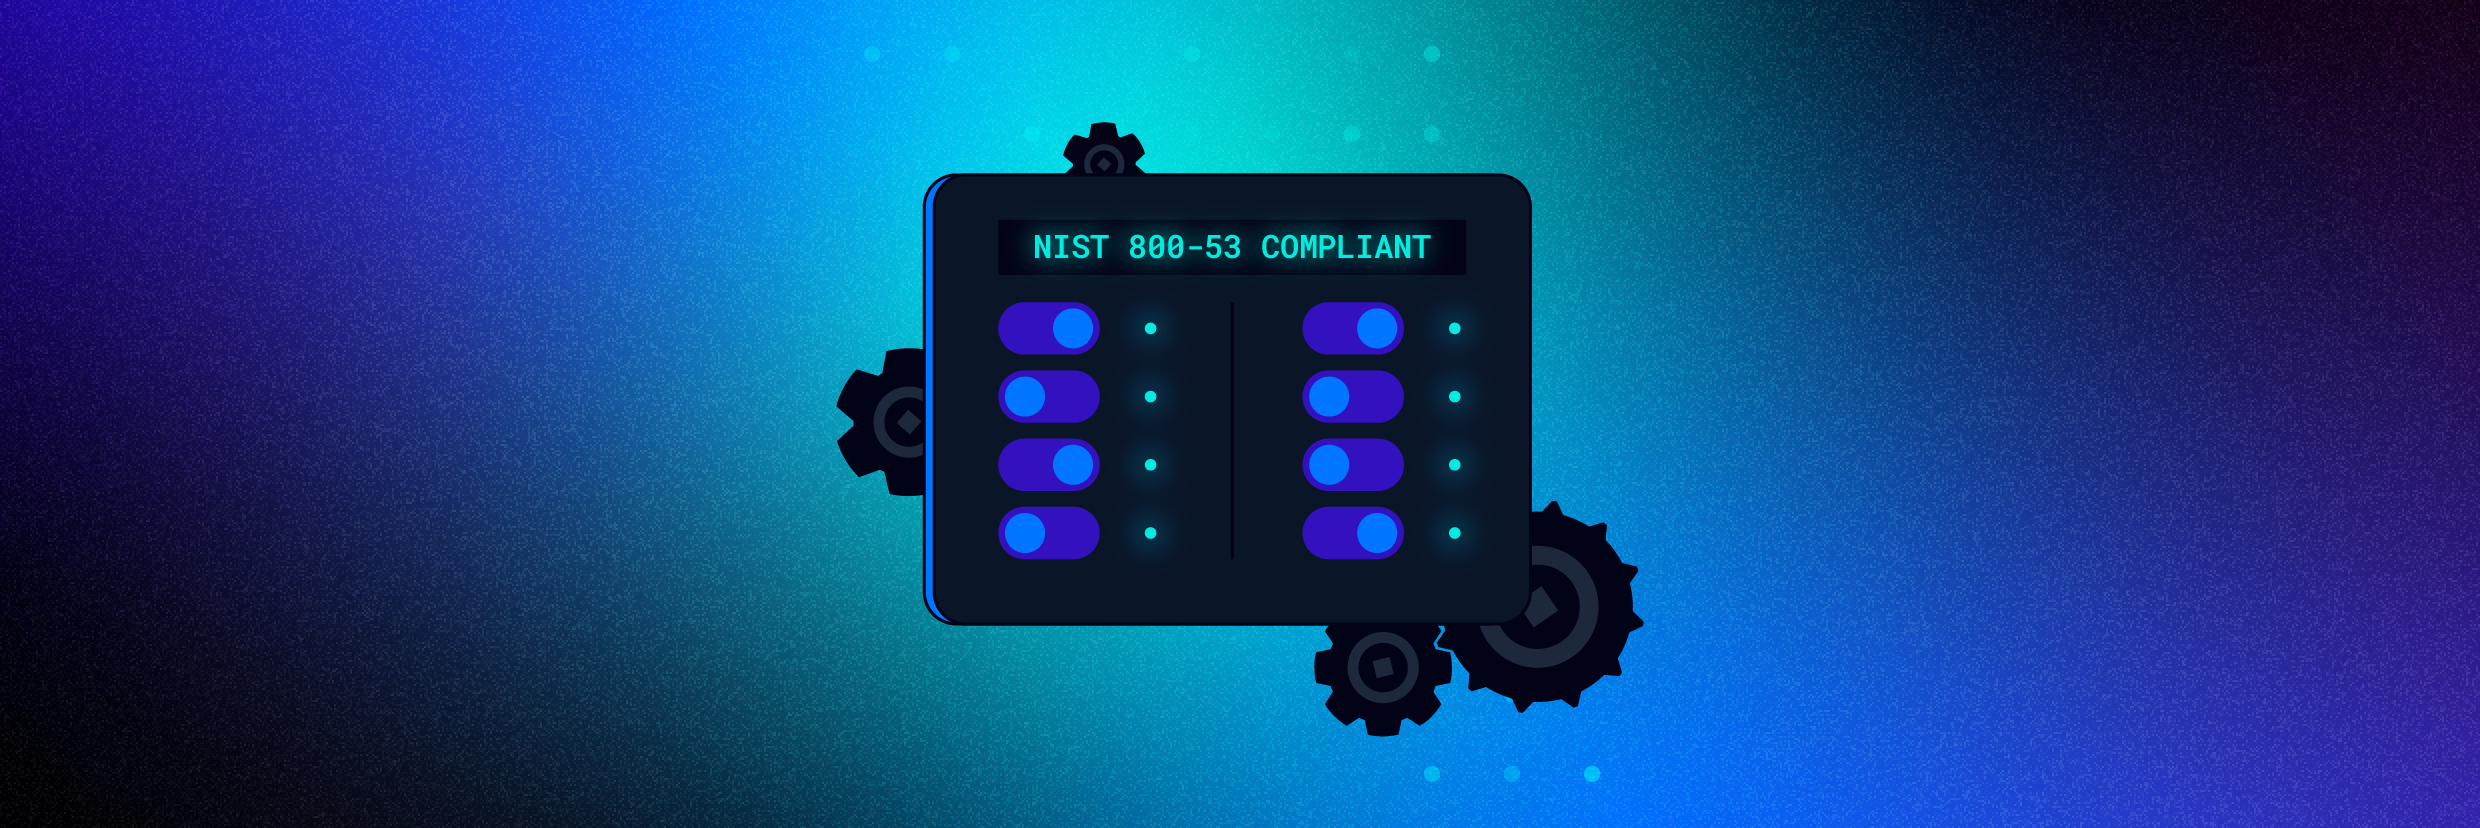 A dark blue checklist titled NIST 800-53 COMPLIANT floats over a blue gradient background.